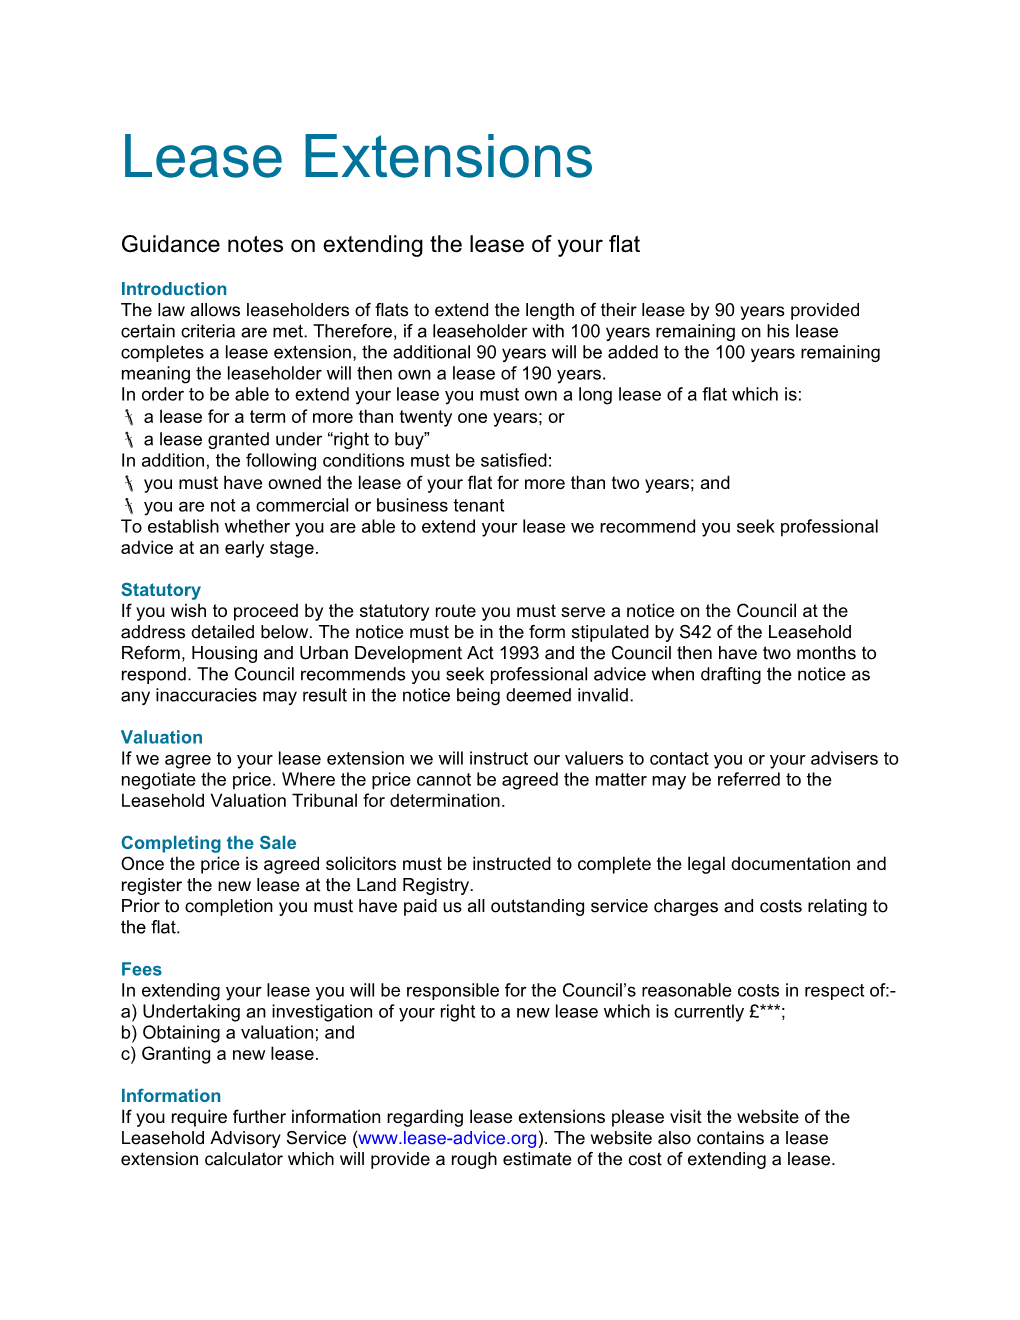 Guidance Notes on Extending the Lease of Your Flat